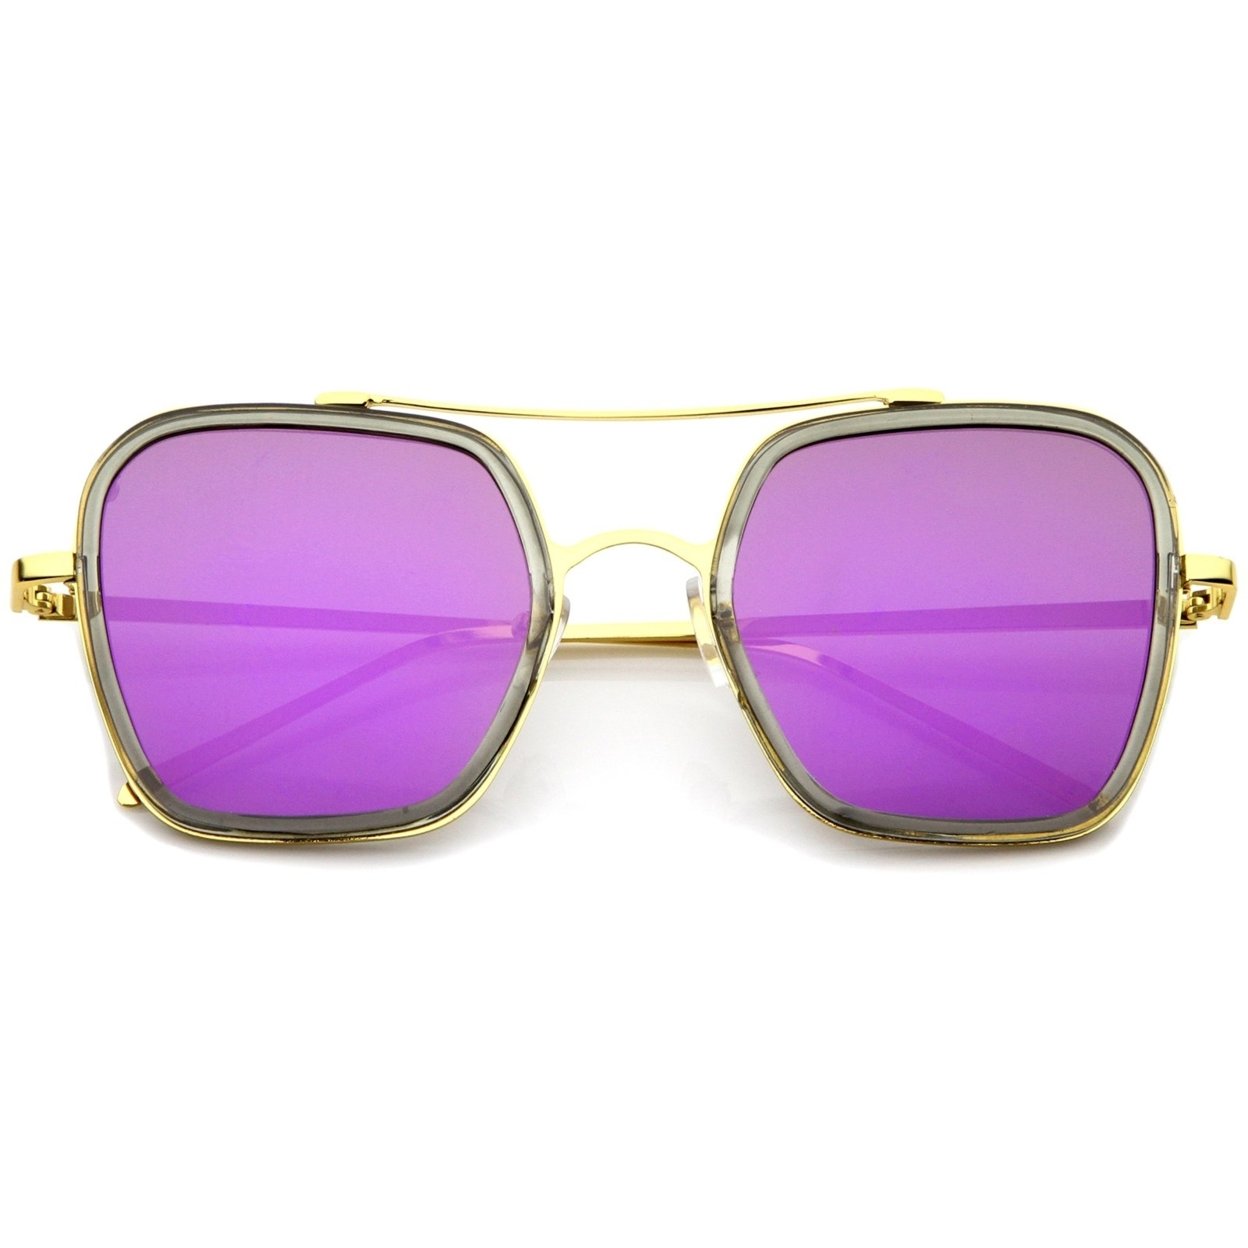 Modern Slim Temple Browbar Color Mirrored Flat Lens Square Sunglasses 52mm - Bronze-Gold / Gold Mirror